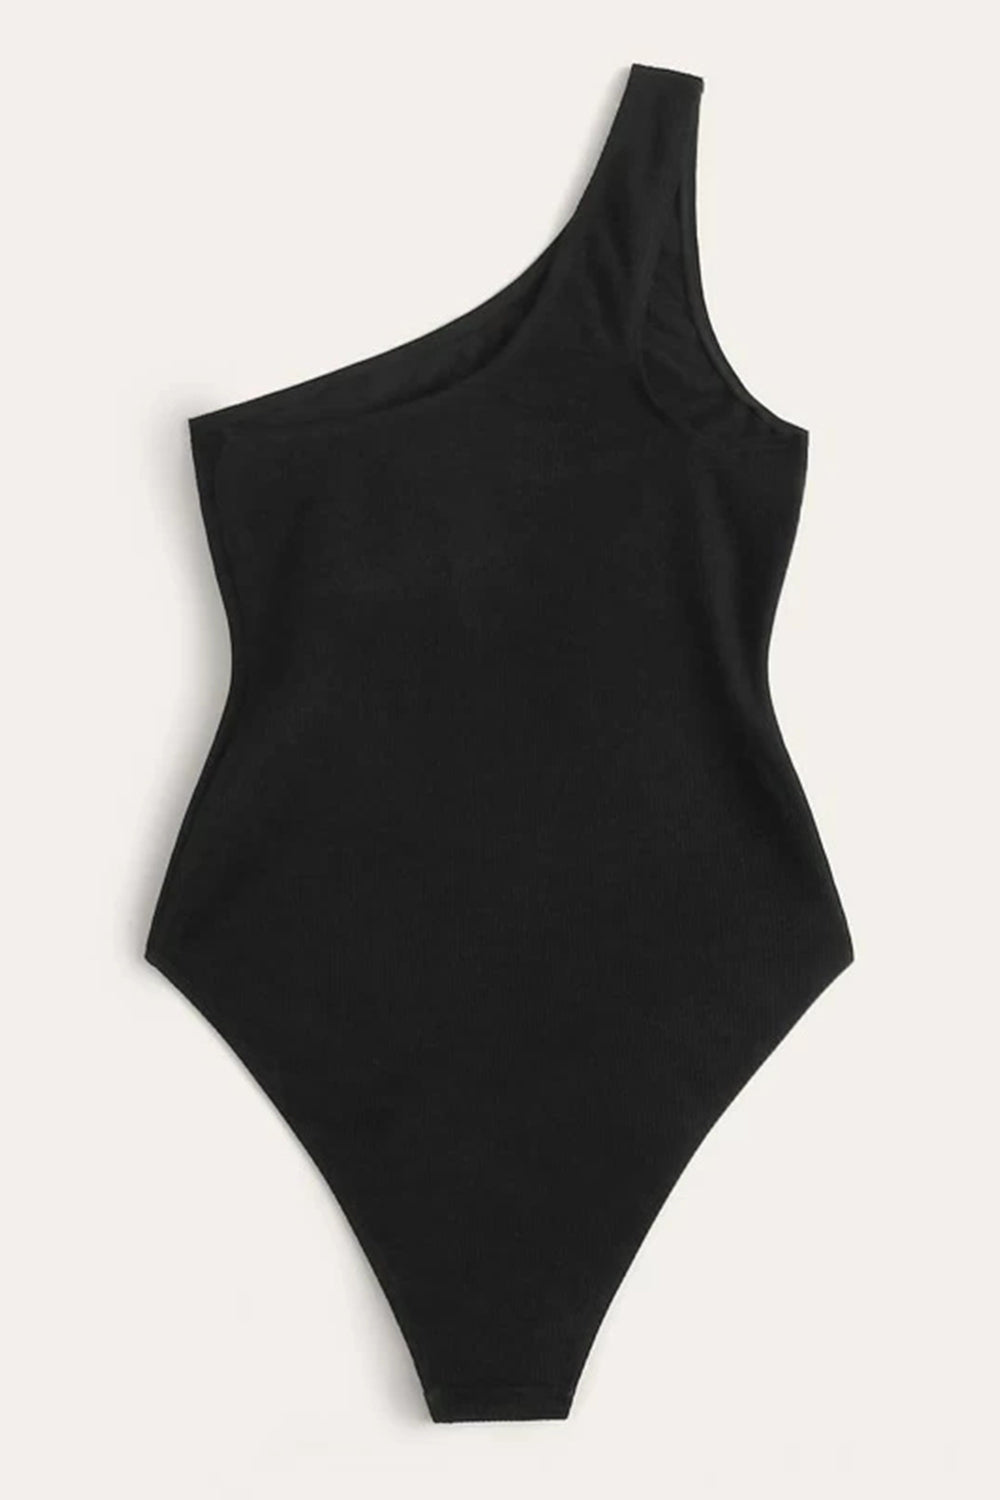 One Shoulder One Piece Swimsuit